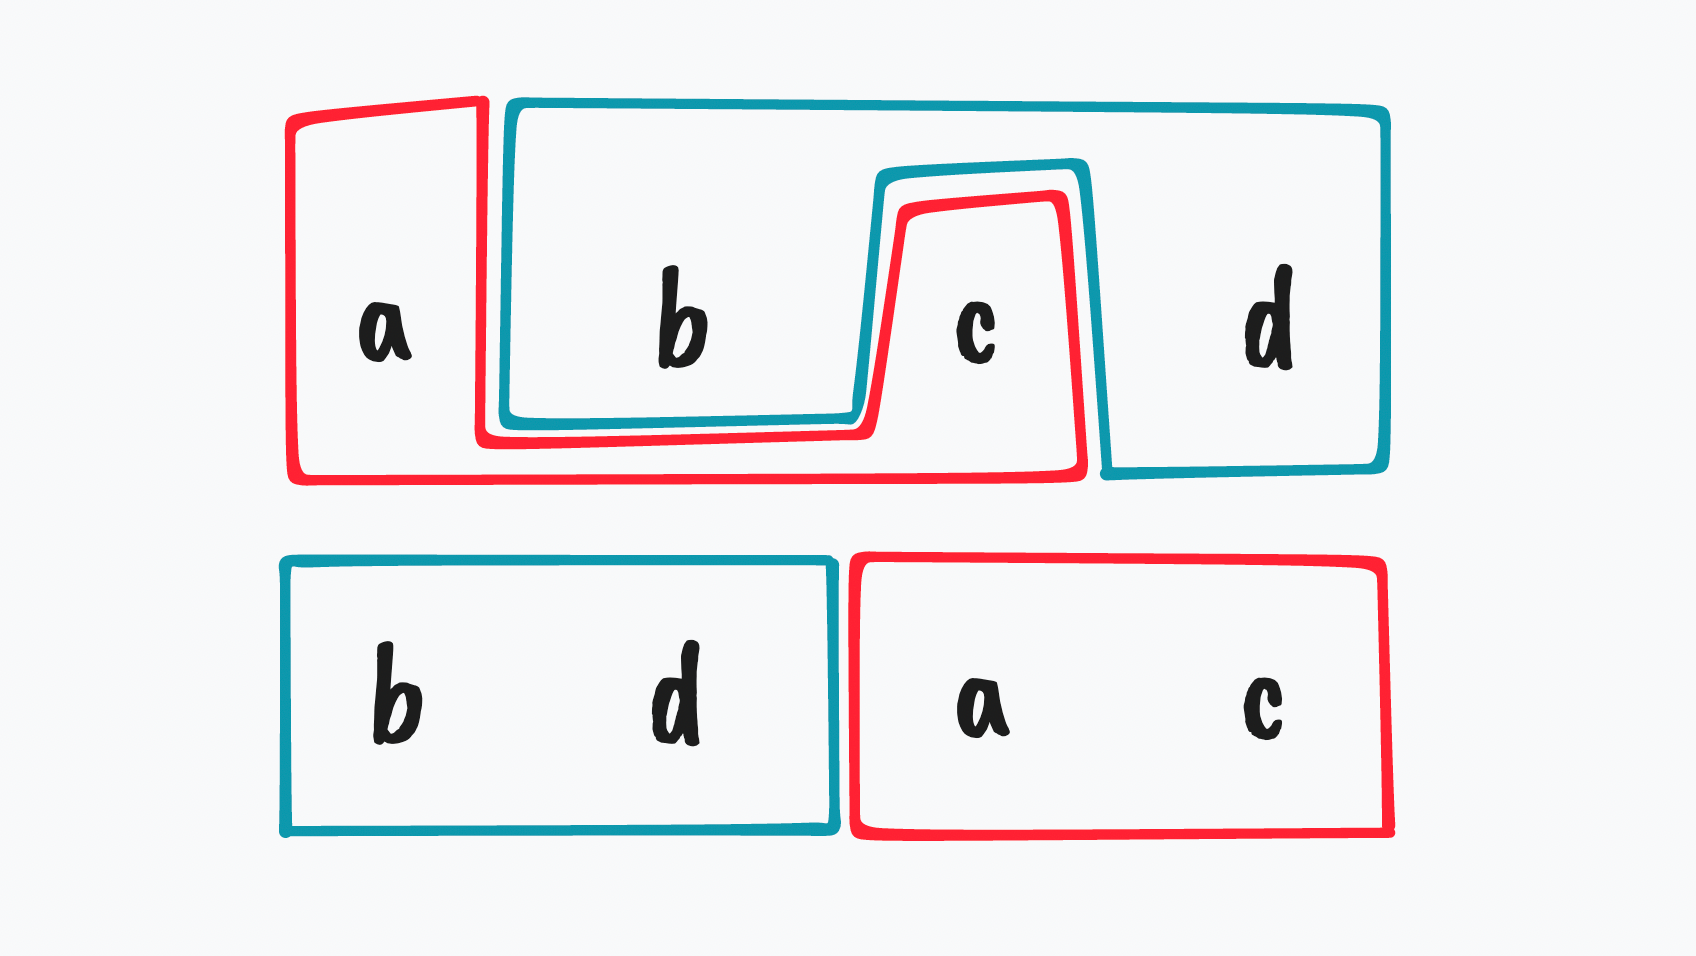 A diagram showing the result of moving a and c to front in items a, b, c, d.